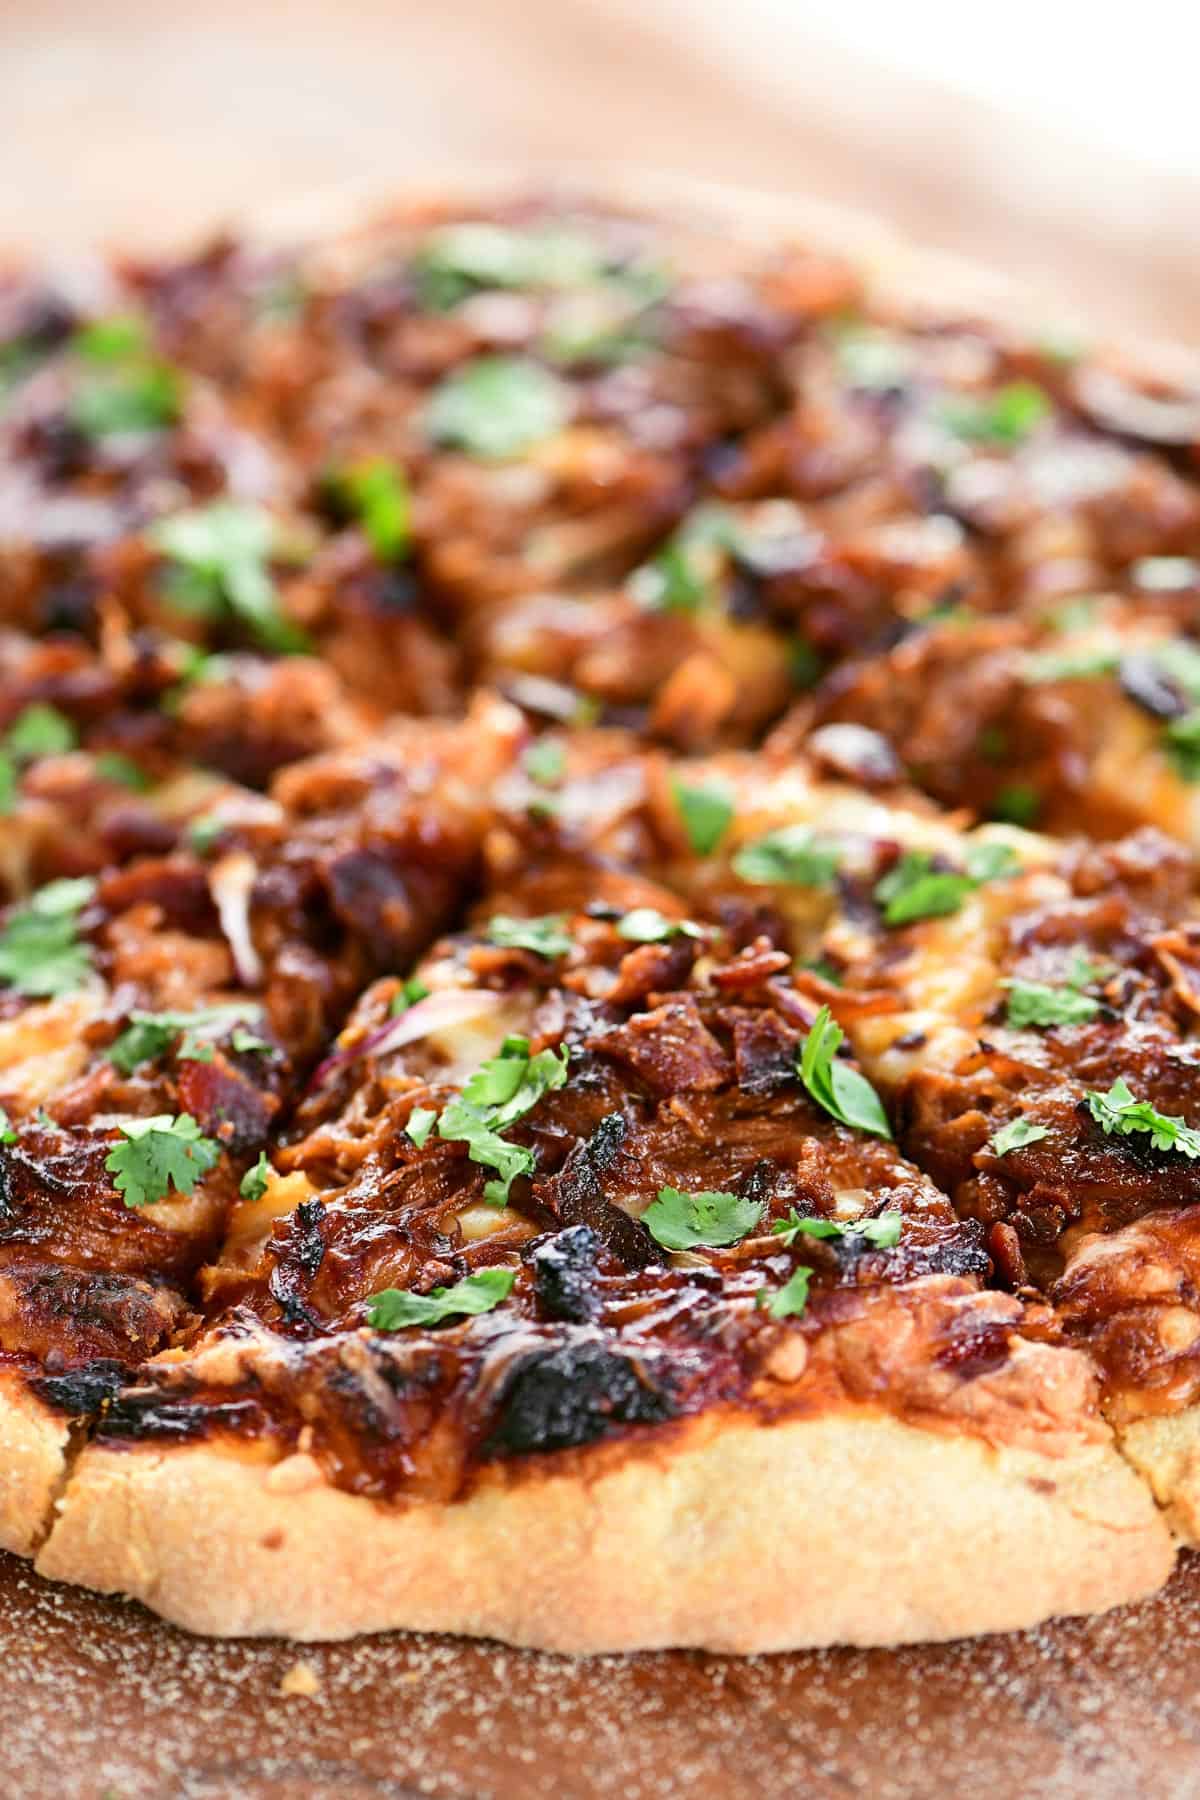 Pulled pork pizza cut into slices.